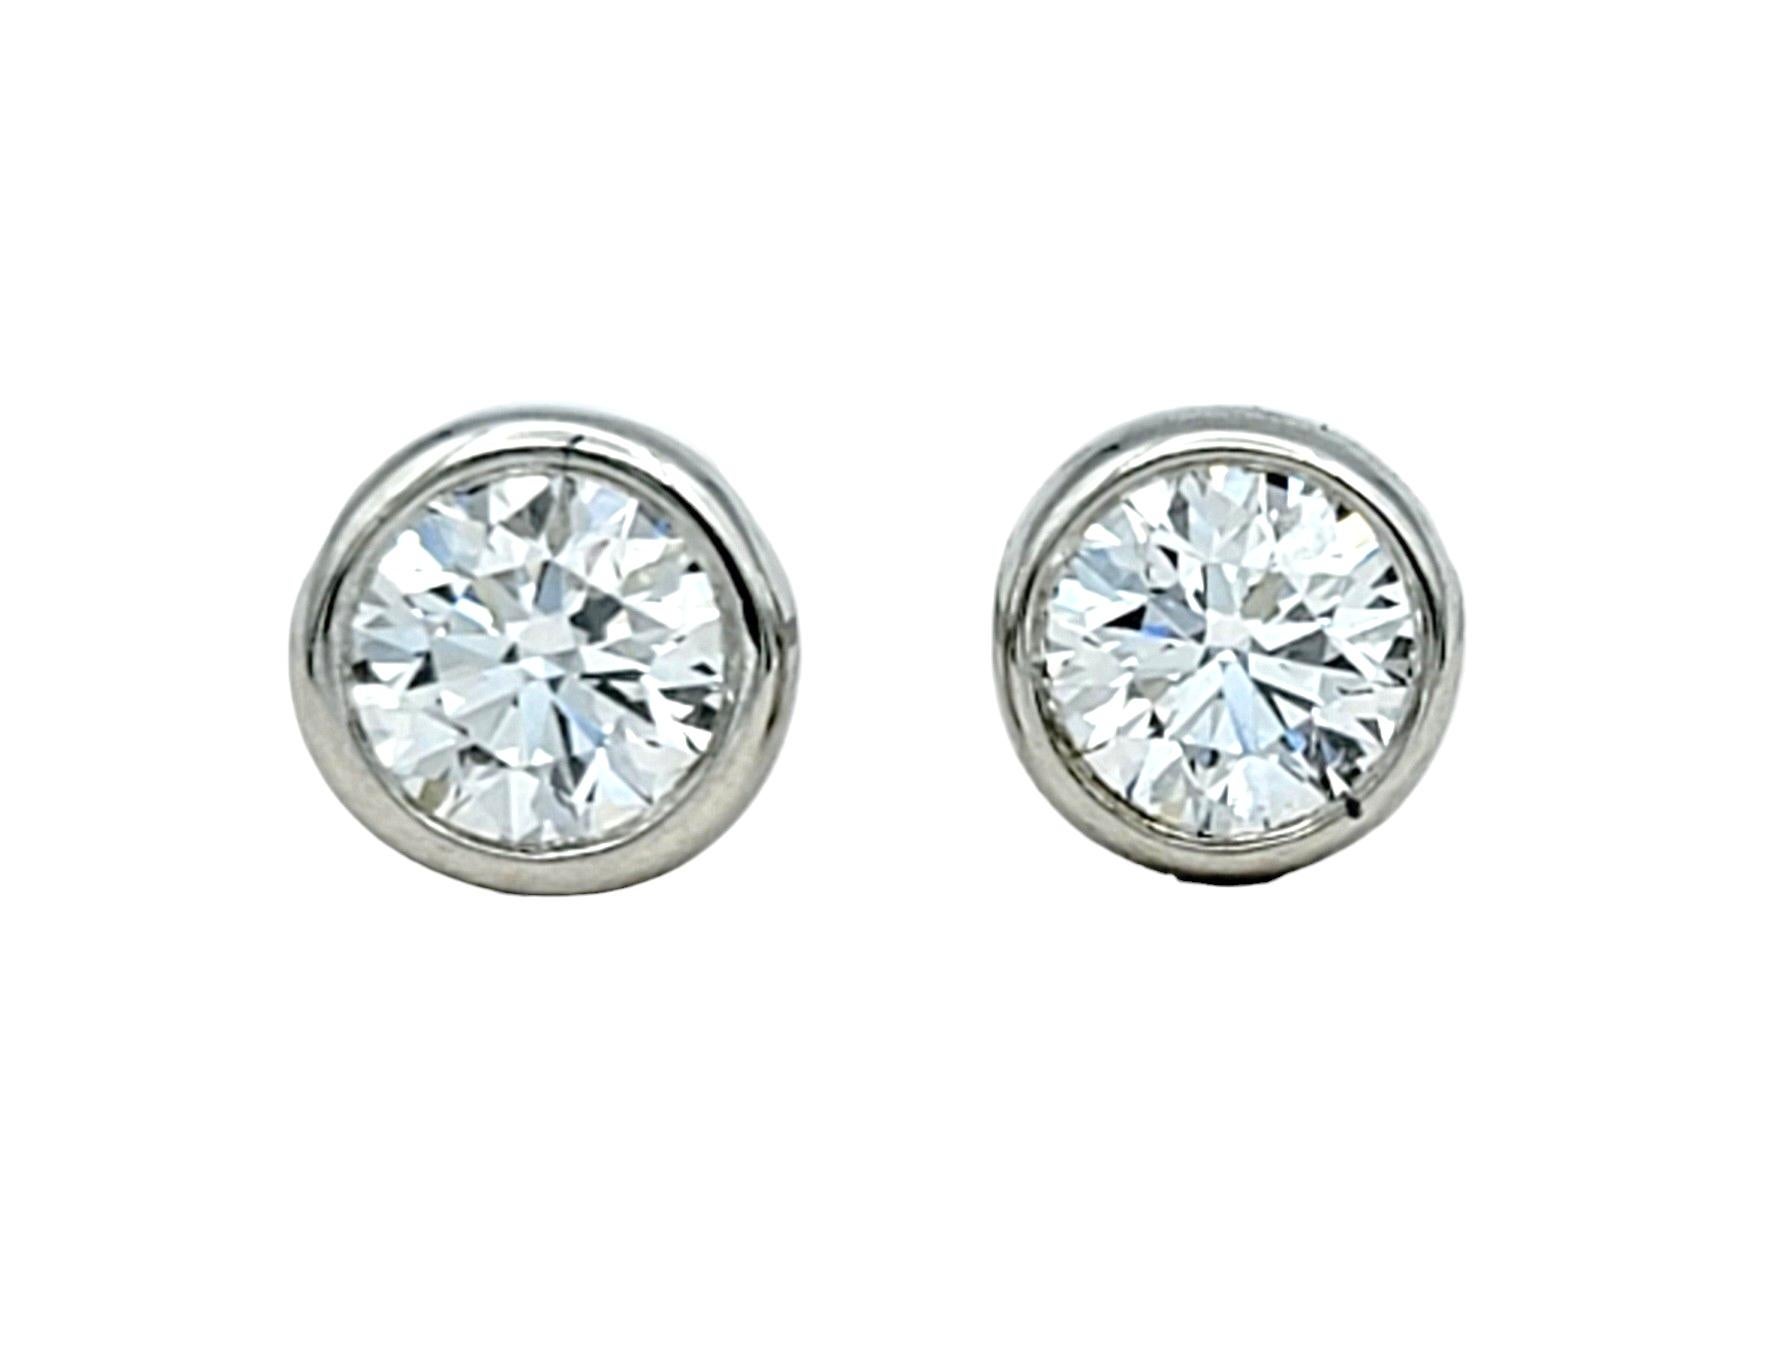 These Tiffany & Co. diamond stud earrings are the epitome of elegance, crafted from platinum and featuring brilliant diamonds securely bezel set. The bezel setting not only adds a sleek and modern touch to the design but also ensures the diamonds